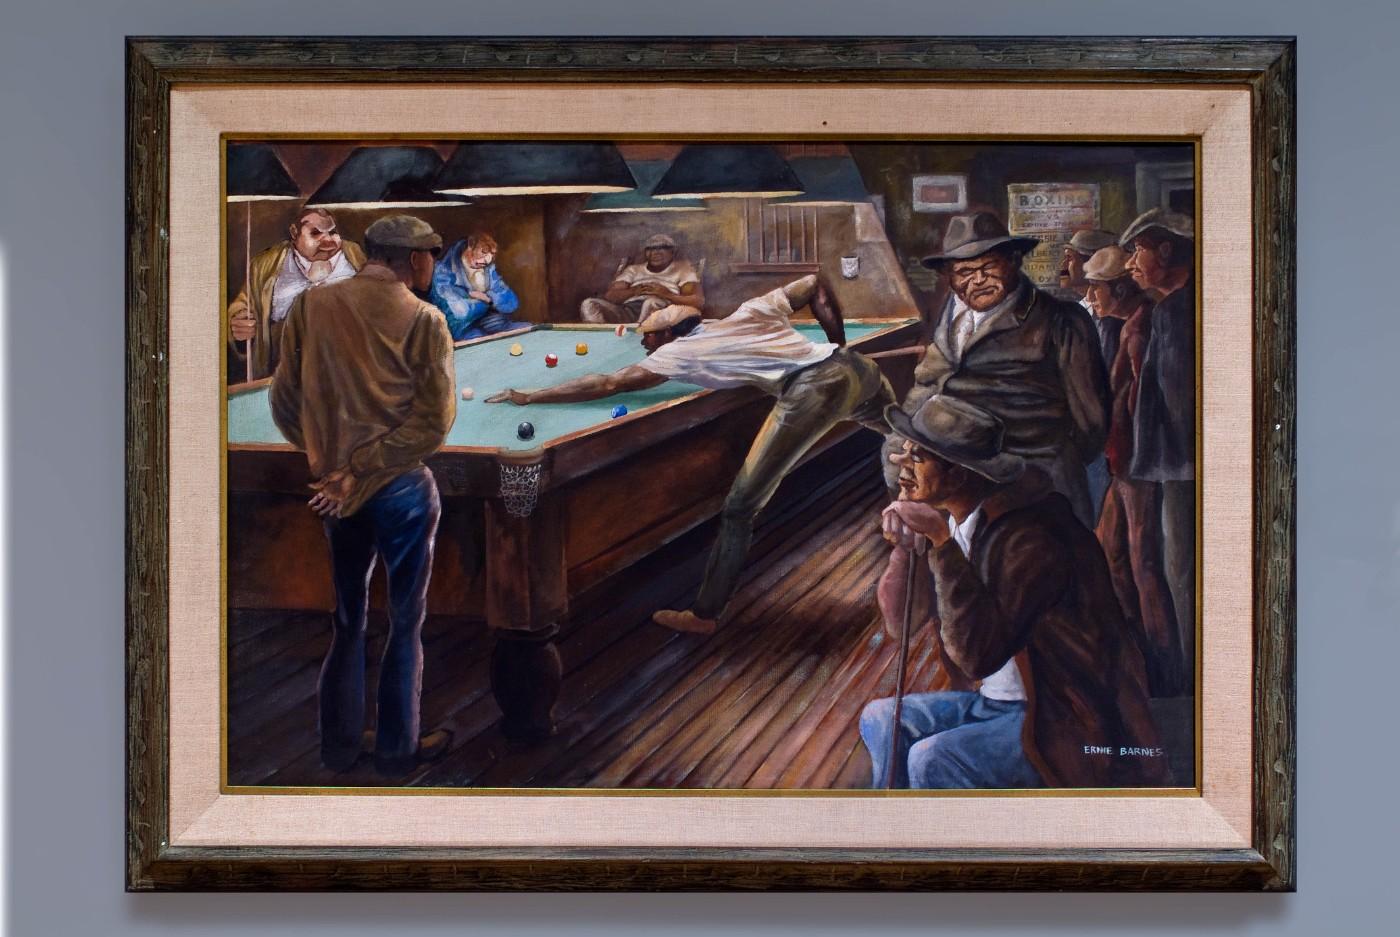 Ernie Barnes, Pool Hall, c. 1970. Oil on canvas. Collection of California African American Museum.